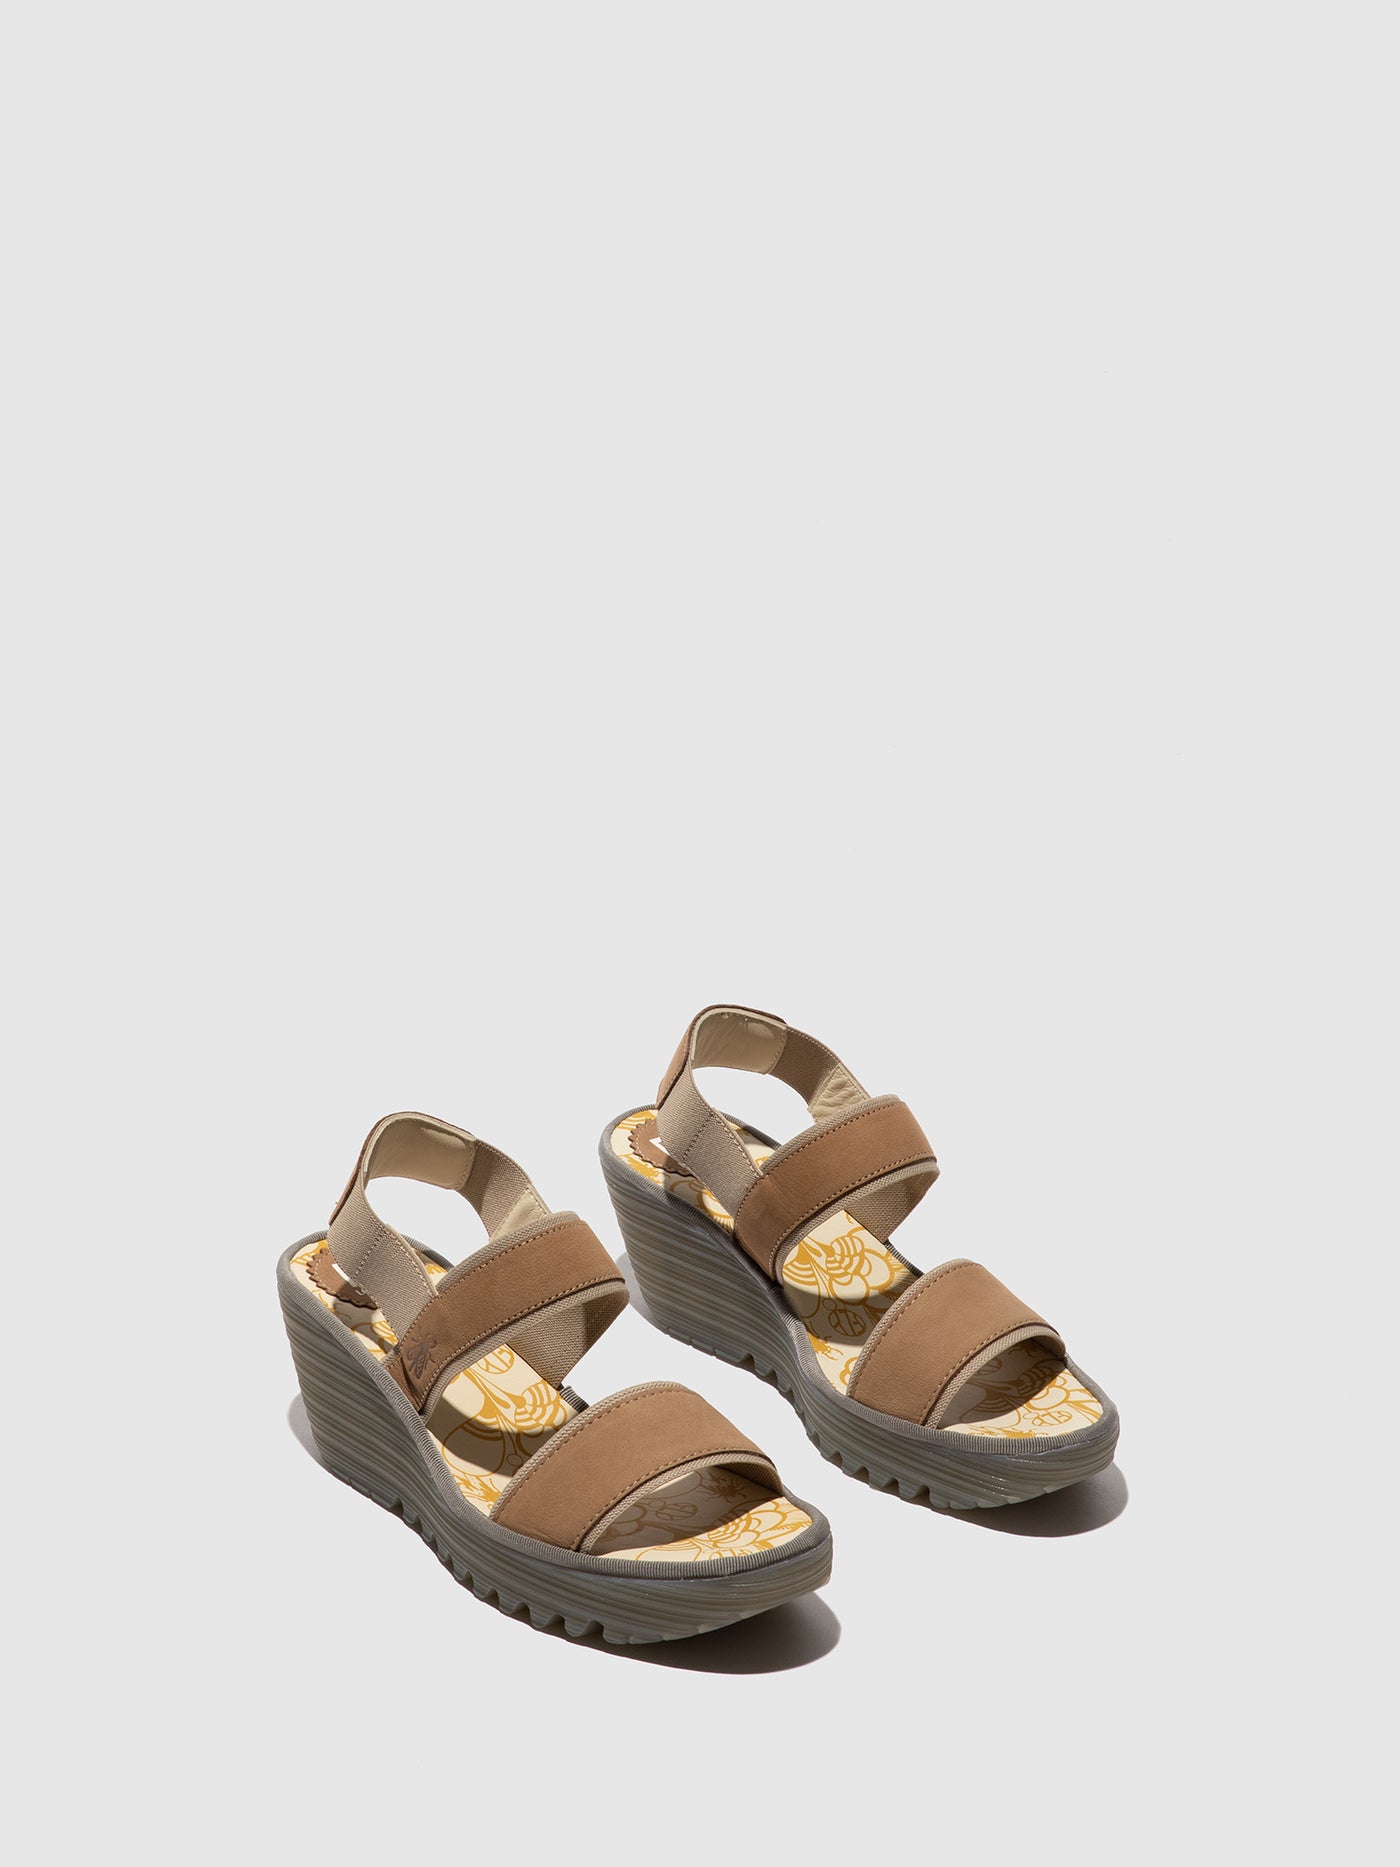 Sling-Back Sandals YACO416FLY SAND